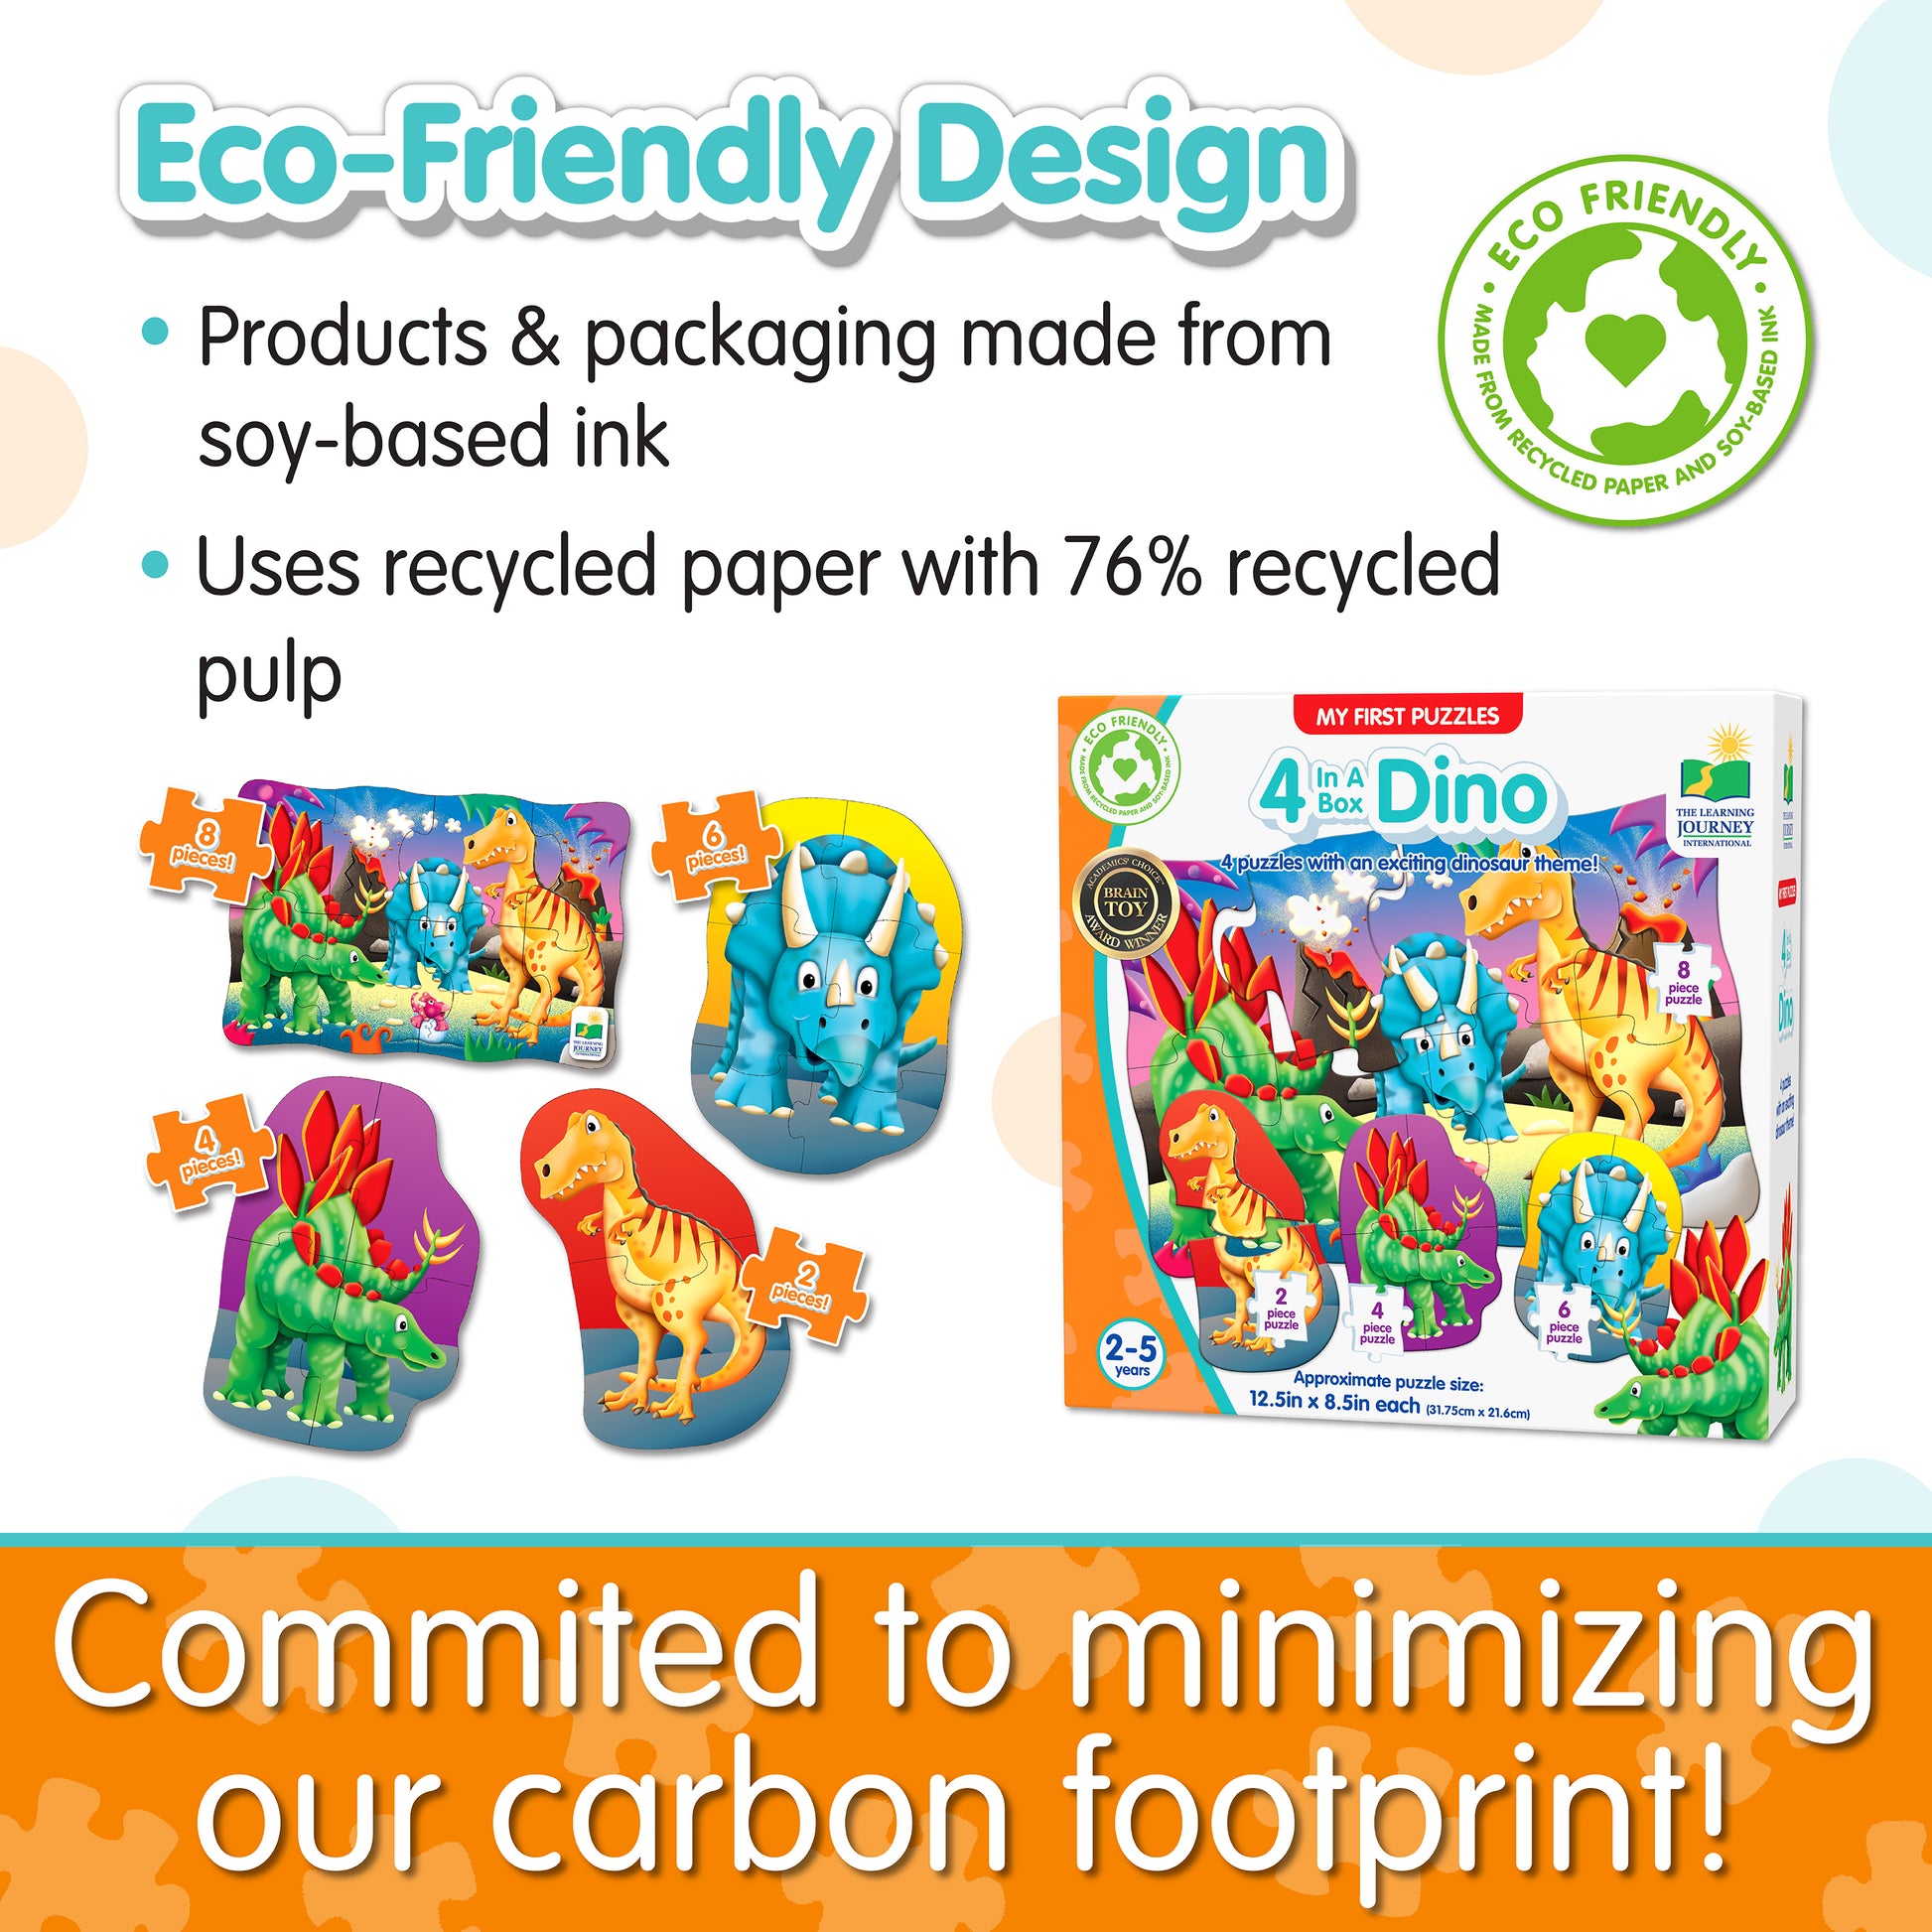 Infographic about 4-In-A-Box Dino Puzzle's eco-friendly design that says, "Committed to minimizing our carbon footprint!"